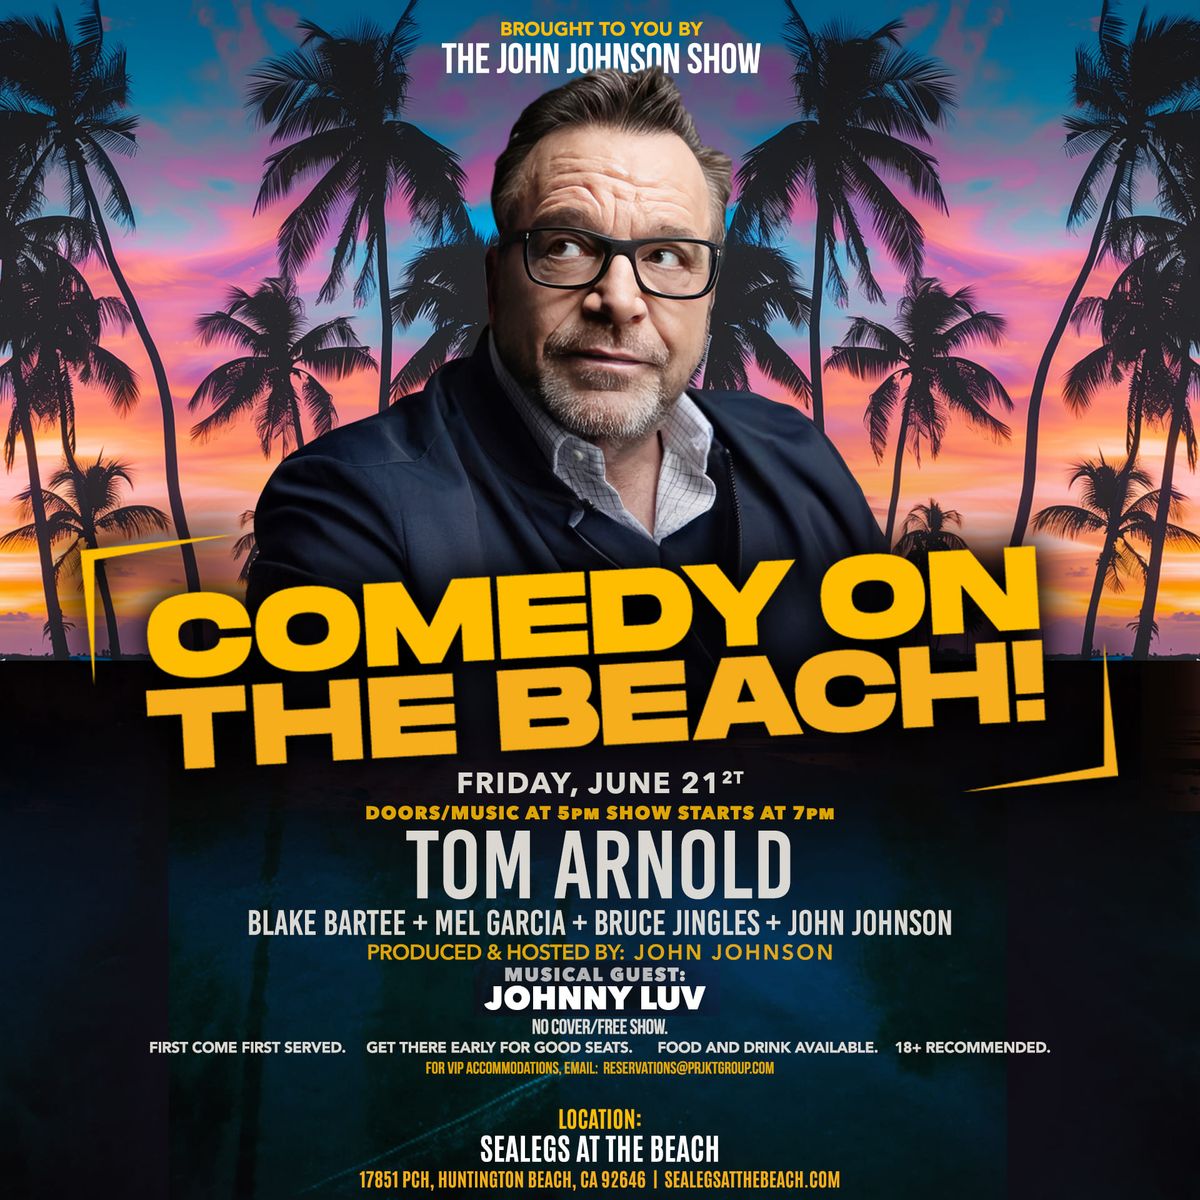 COMEDY ON THE BEACH! - Featuring TOM ARNOLD - Fri June 21st - FREE SHOW\/NO COVER!